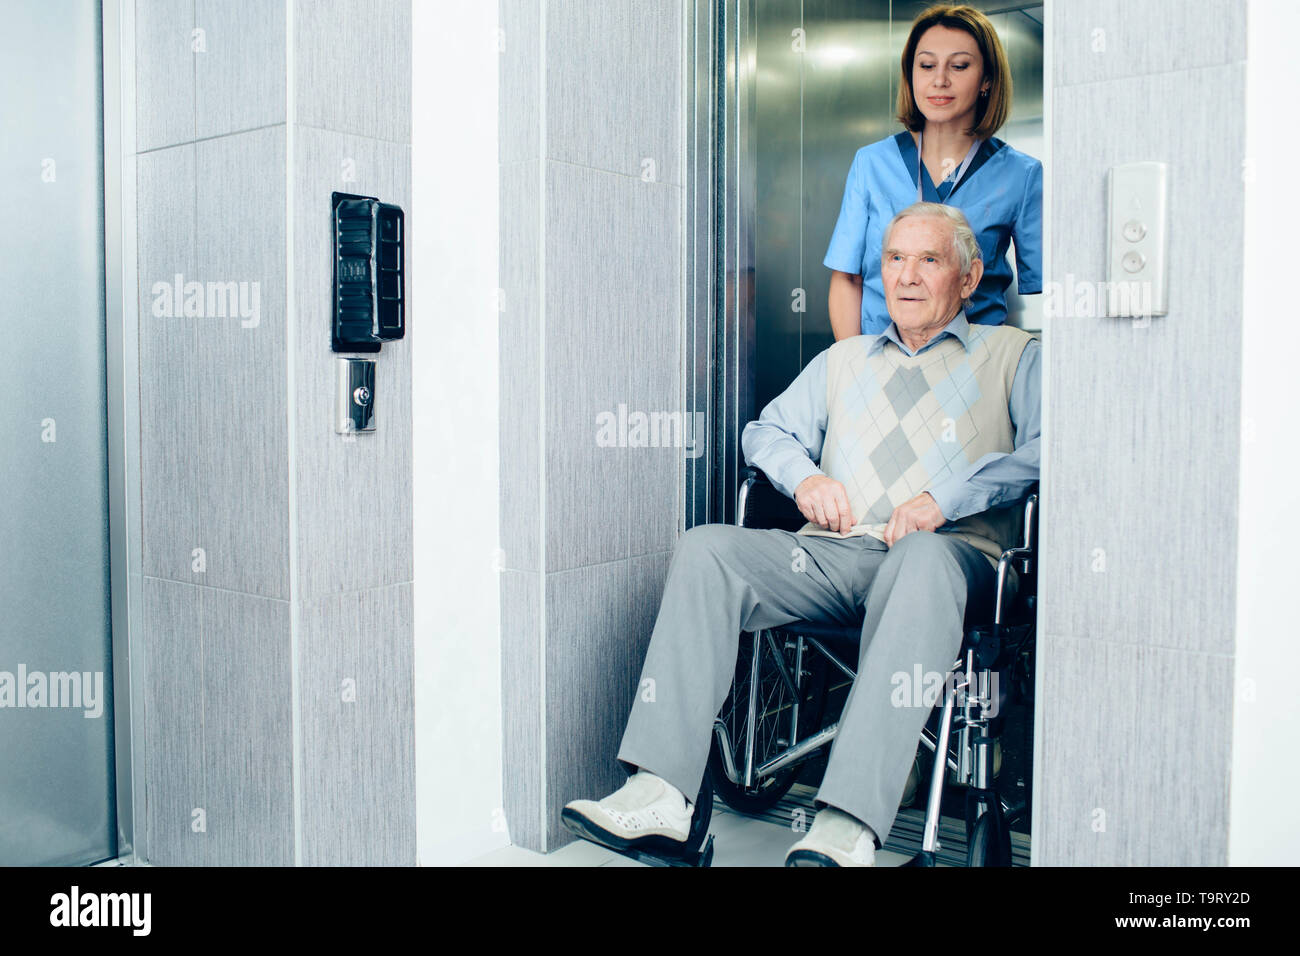 Thoughtful nurse pushing senior patient in wheelchair at hospital lift Stock Photo